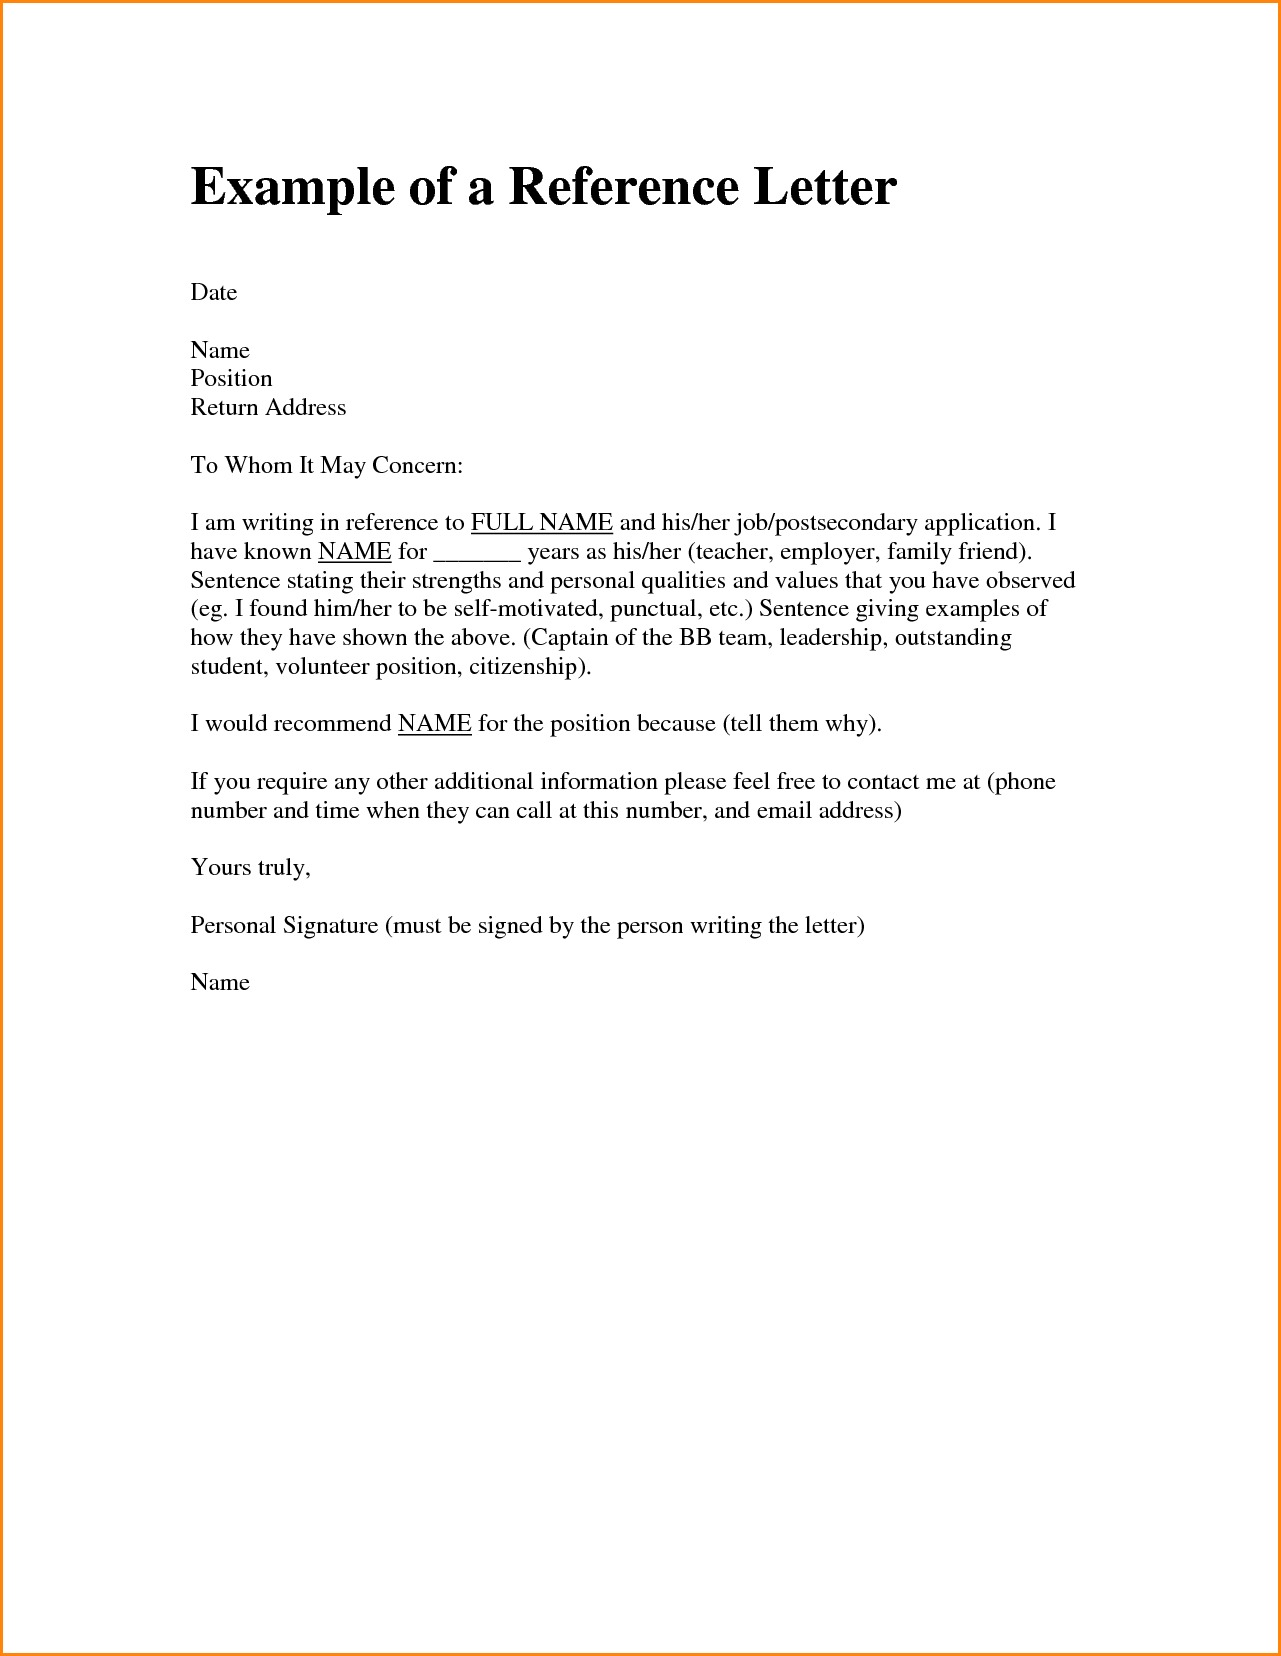 personal letter of recommendation template   Mini.mfagency.co